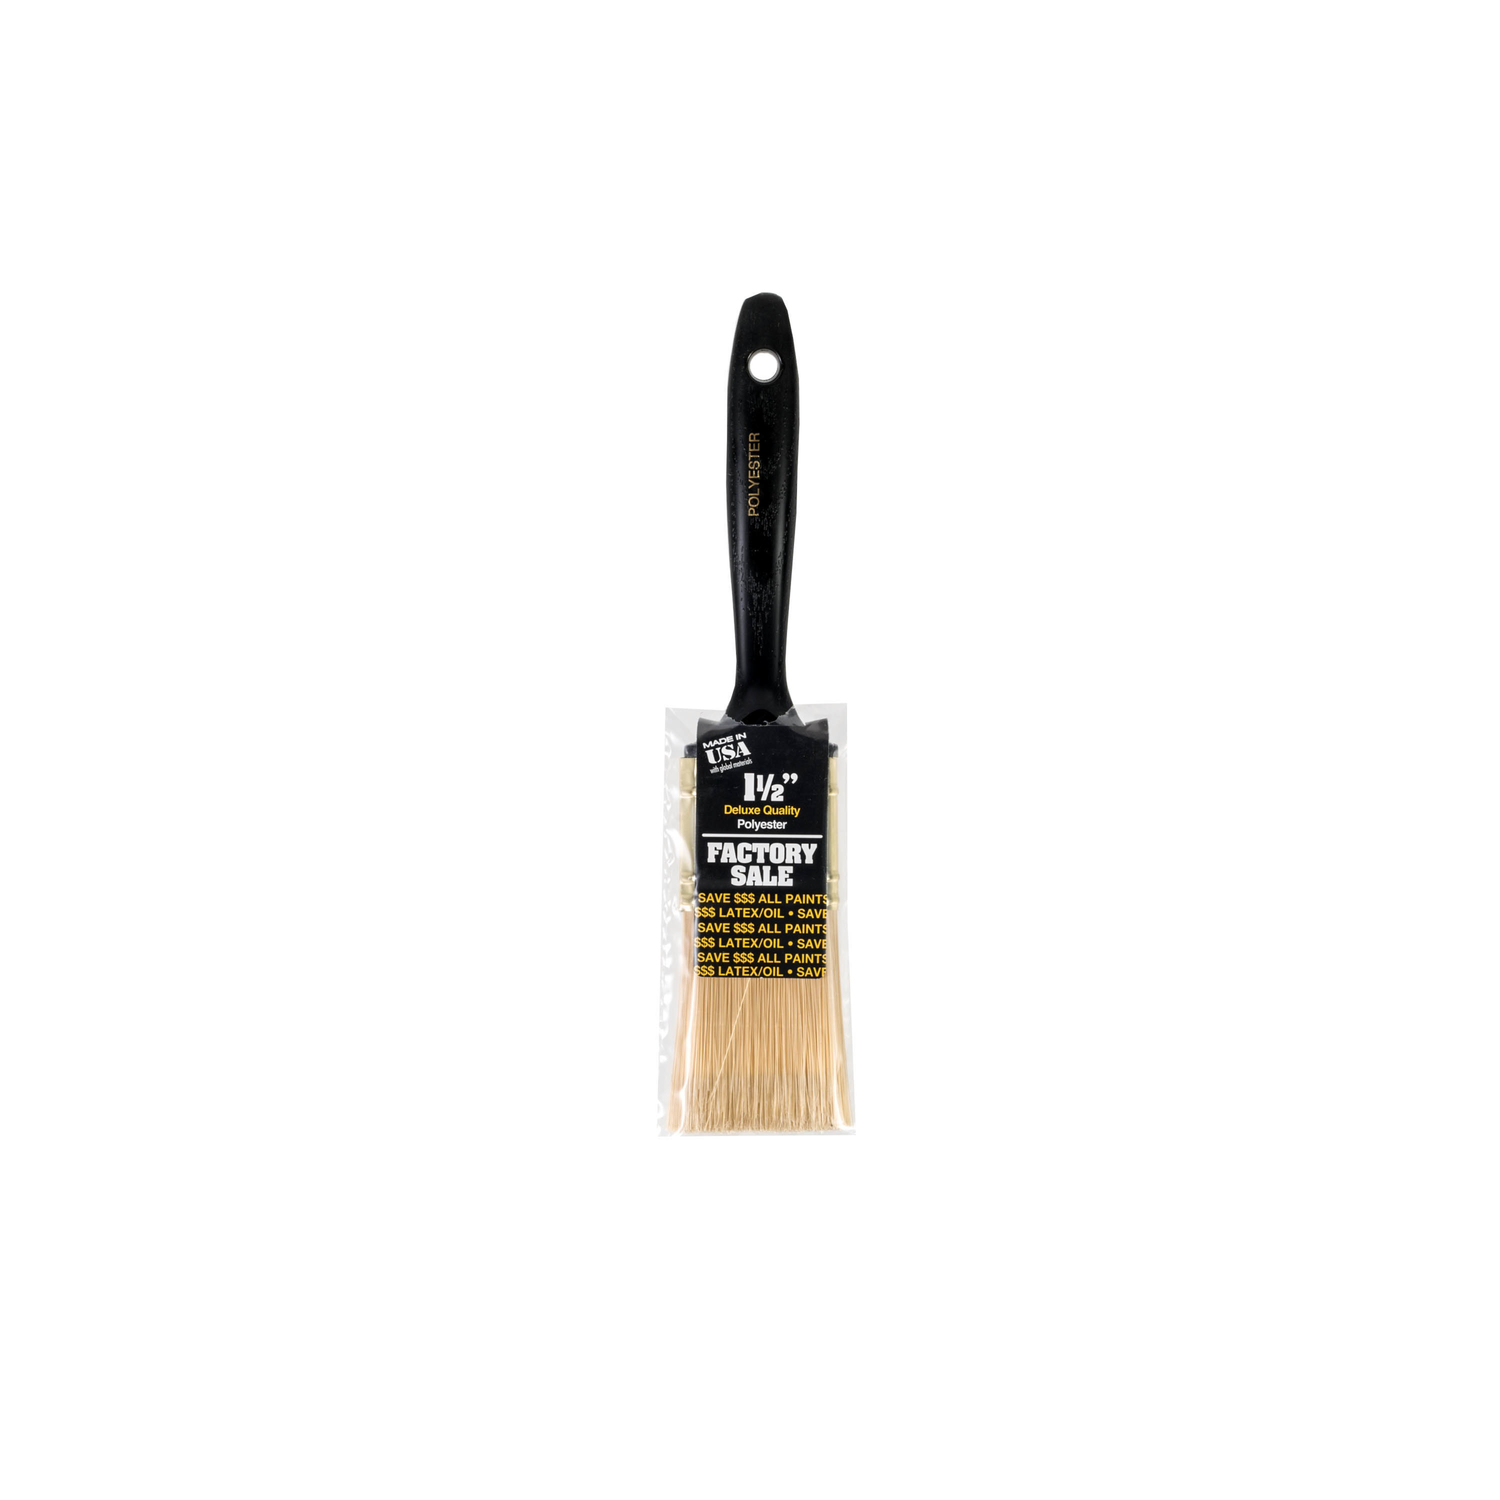 Photos - Putty Knife / Painting Tool Wooster 1-1/2 in. Flat Paint Brush P3971-1 1/2